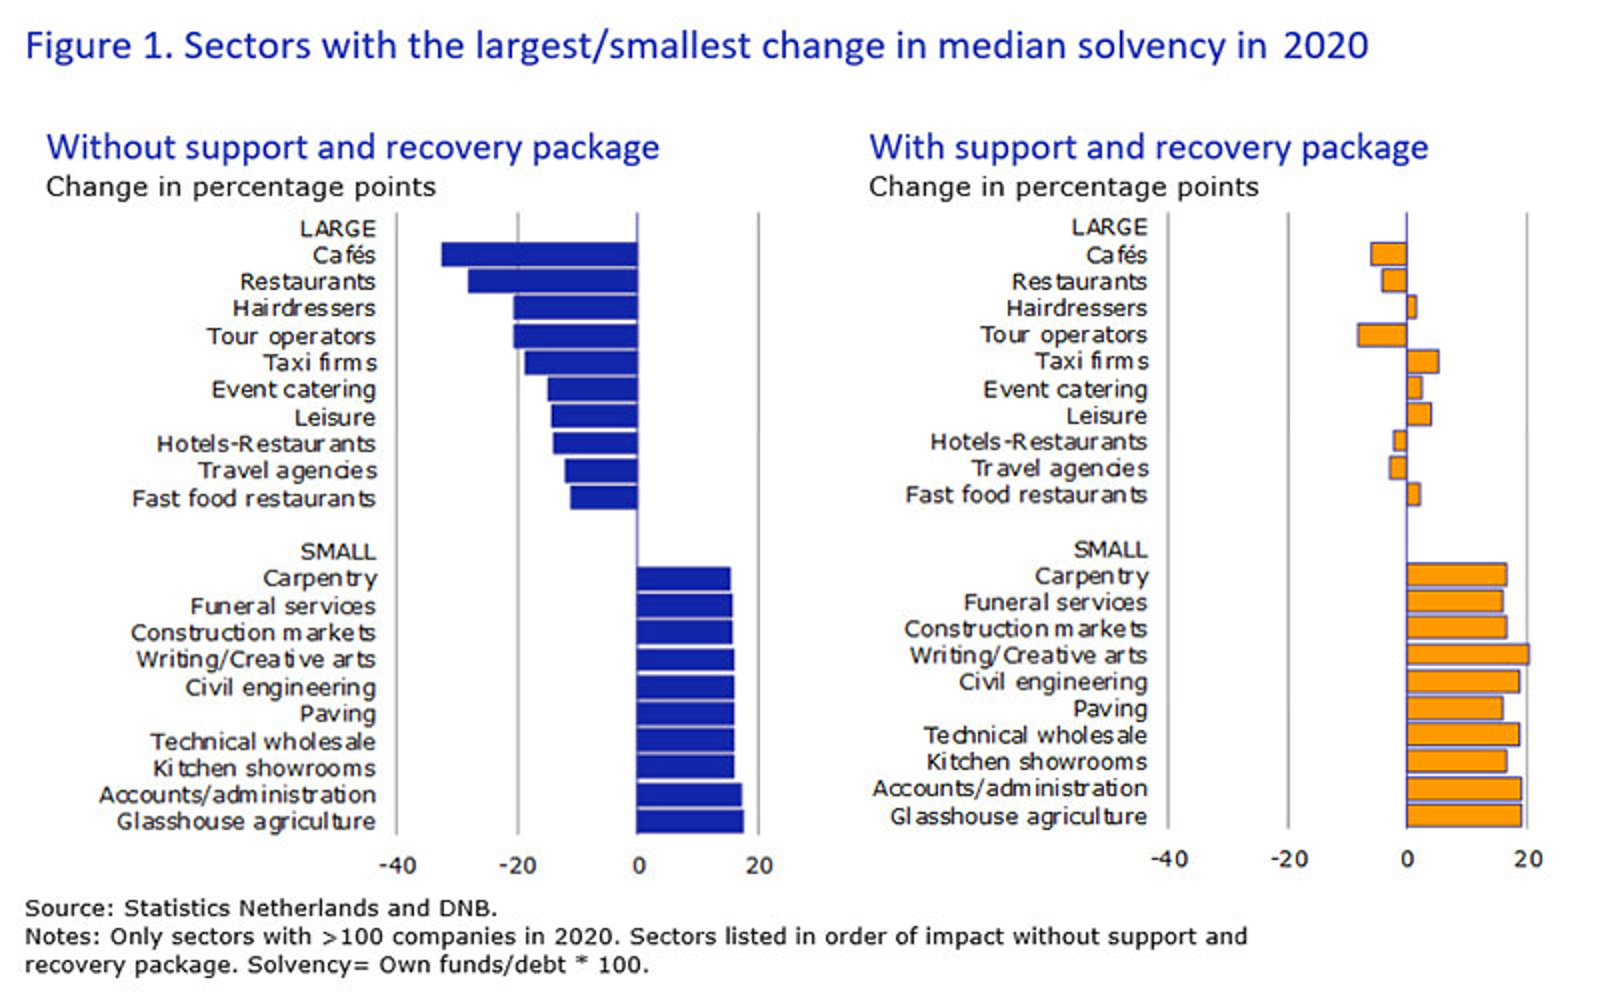 Sectors with the largest/smallest change in median solvency in 2020